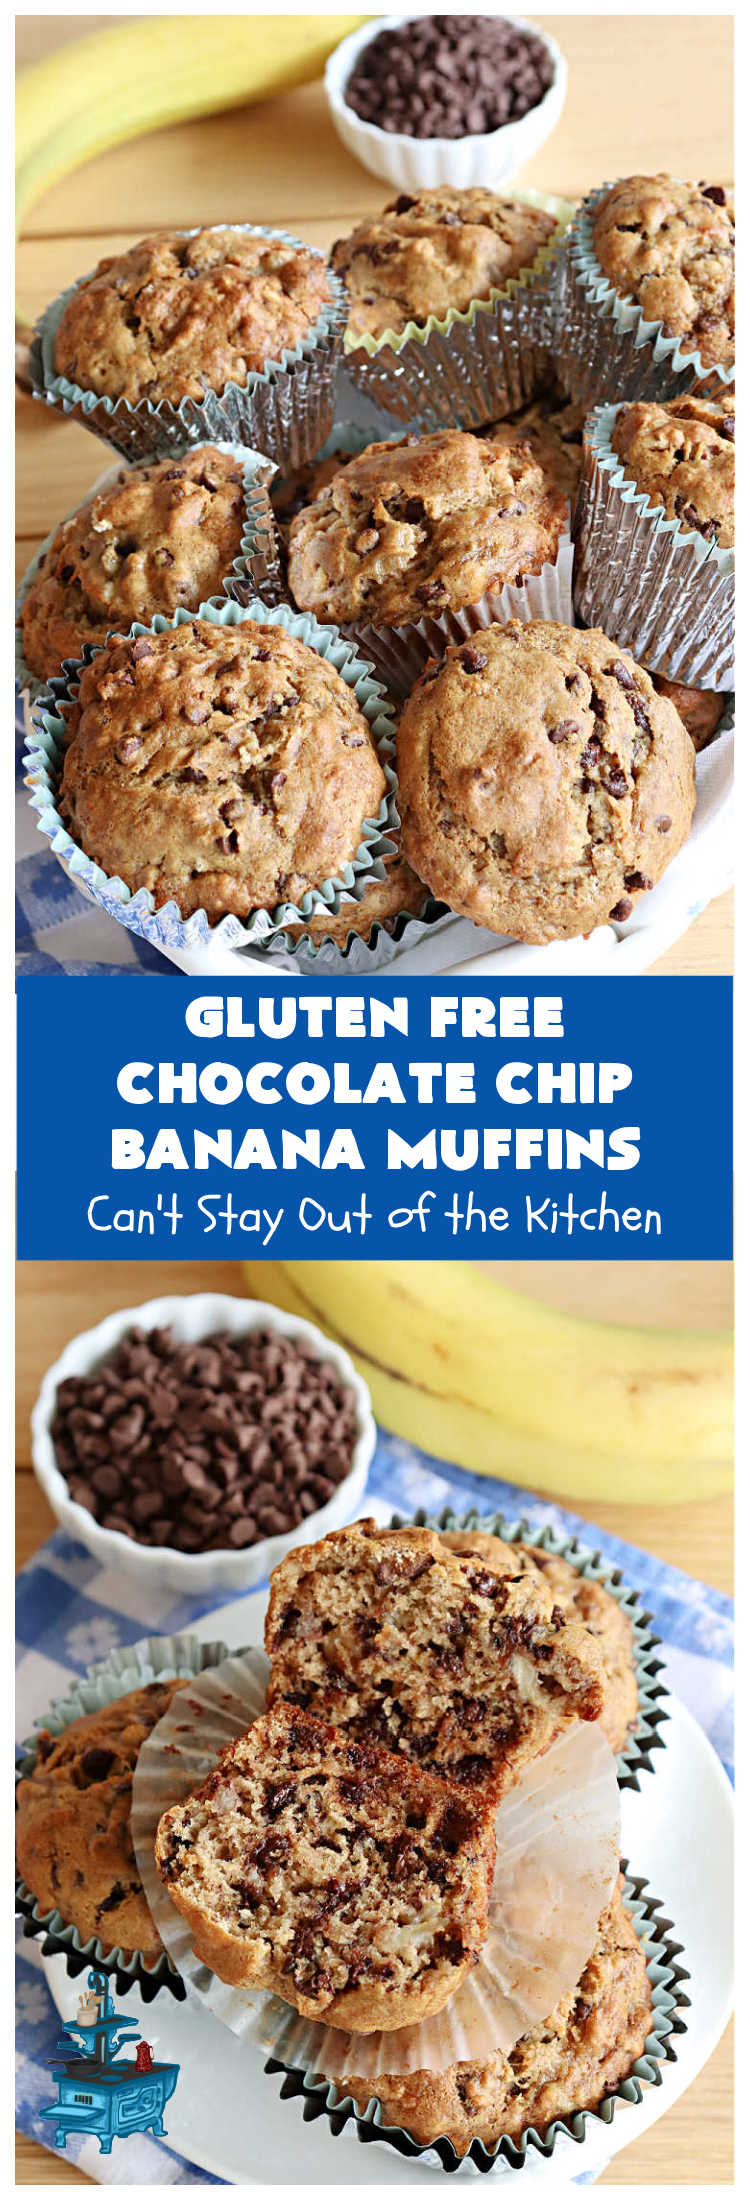 Gluten Free Chocolate Chip Banana Muffins | Can't Stay Out of the Kitchen | You'll never believe you're eating #GlutenFree #muffins with this #recipe! These #BreakfastMuffins have great texture & taste. In fact, they're so drool-worthy you'll be swooning from the first bite. #walnuts #cinnamon #bananas #chocolate #GlutenFreeFlour #ChocolateChips #holiday #breakfast #HolidayBreakfast #Thanksgiving #Christmas #NewYearsDay #GlutenFreeChocolateChipBananaMuffinsGluten Free Chocolate Chip Banana Muffins | Can't Stay Out of the Kitchen | You'll never believe you're eating #GlutenFree #muffins with this #recipe! These #BreakfastMuffins have great texture & taste. In fact, they're so drool-worthy you'll be swooning from the first bite. #walnuts #cinnamon #bananas #chocolate #GlutenFreeFlour #ChocolateChips #holiday #breakfast #HolidayBreakfast #Thanksgiving #Christmas #NewYearsDay #GlutenFreeChocolateChipBananaMuffins